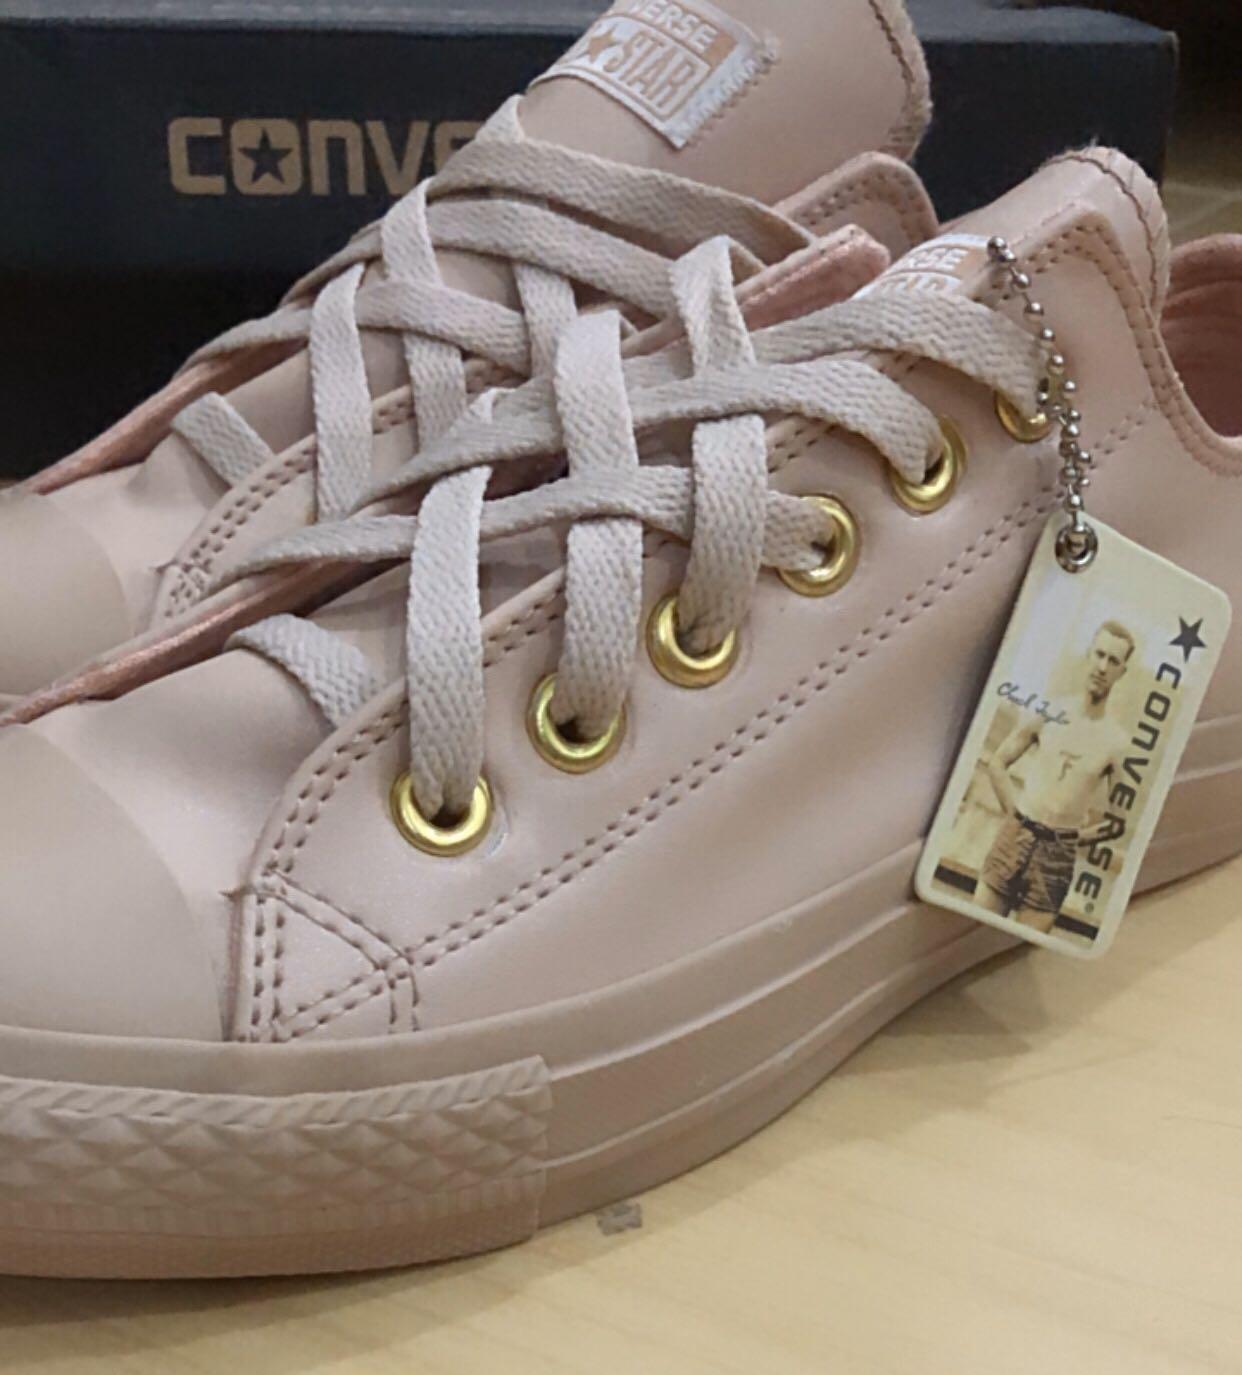 christina hemrick recommends Where To Buy Converse Nude Collection